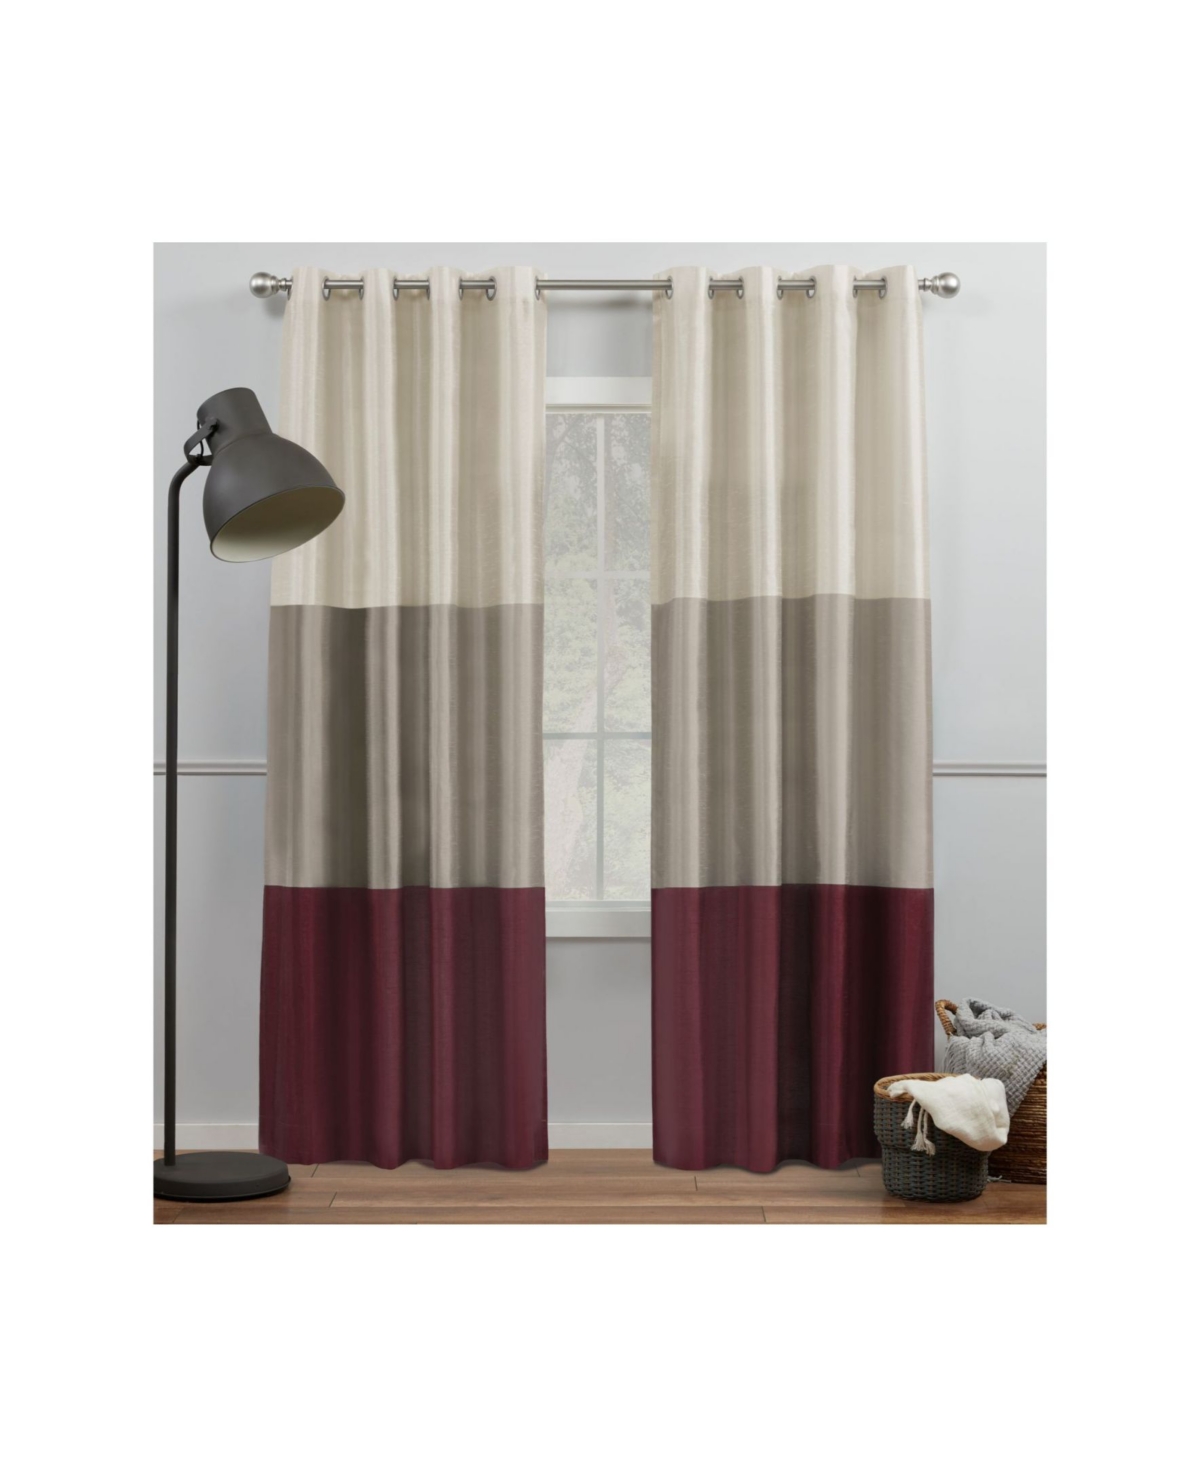 Curtains Chateau Striped Grommet Top Curtain Panel Pair, 54" x 84" - Red